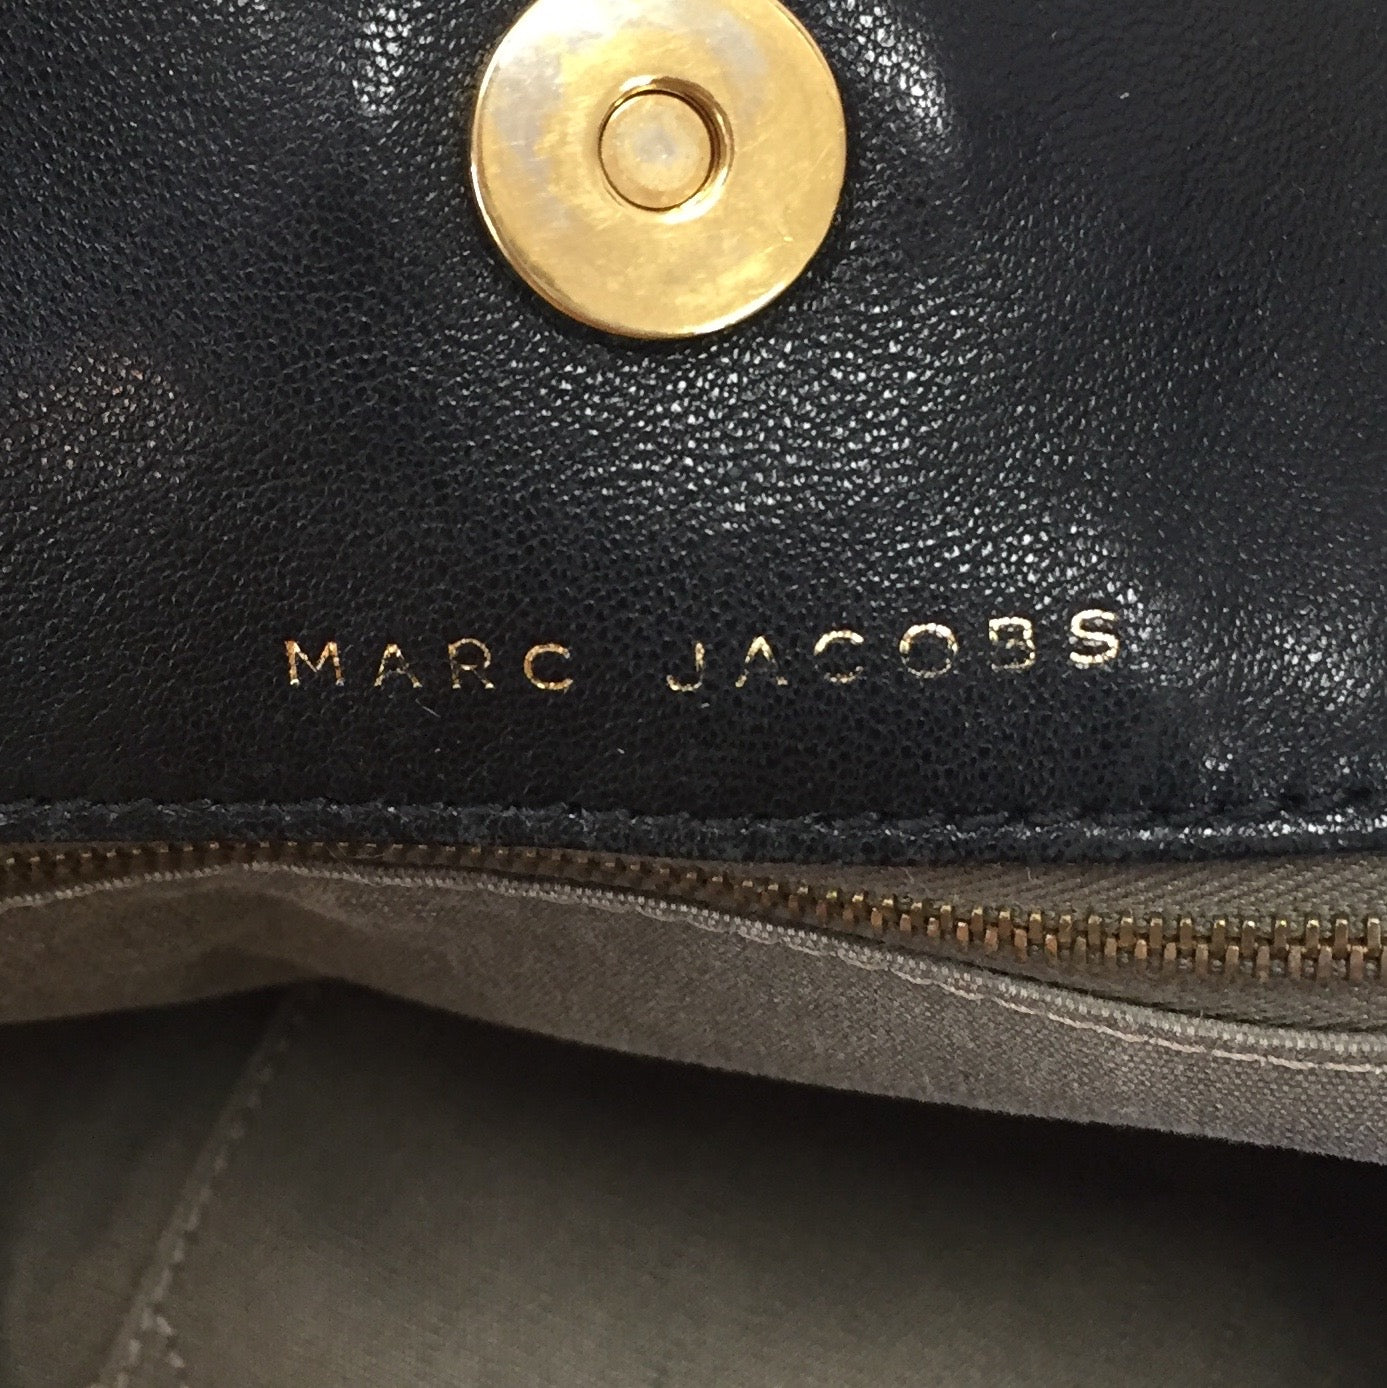 Authentic Marc Jacobs Black Leather Paradise "Amber" Studded Hobo Tote